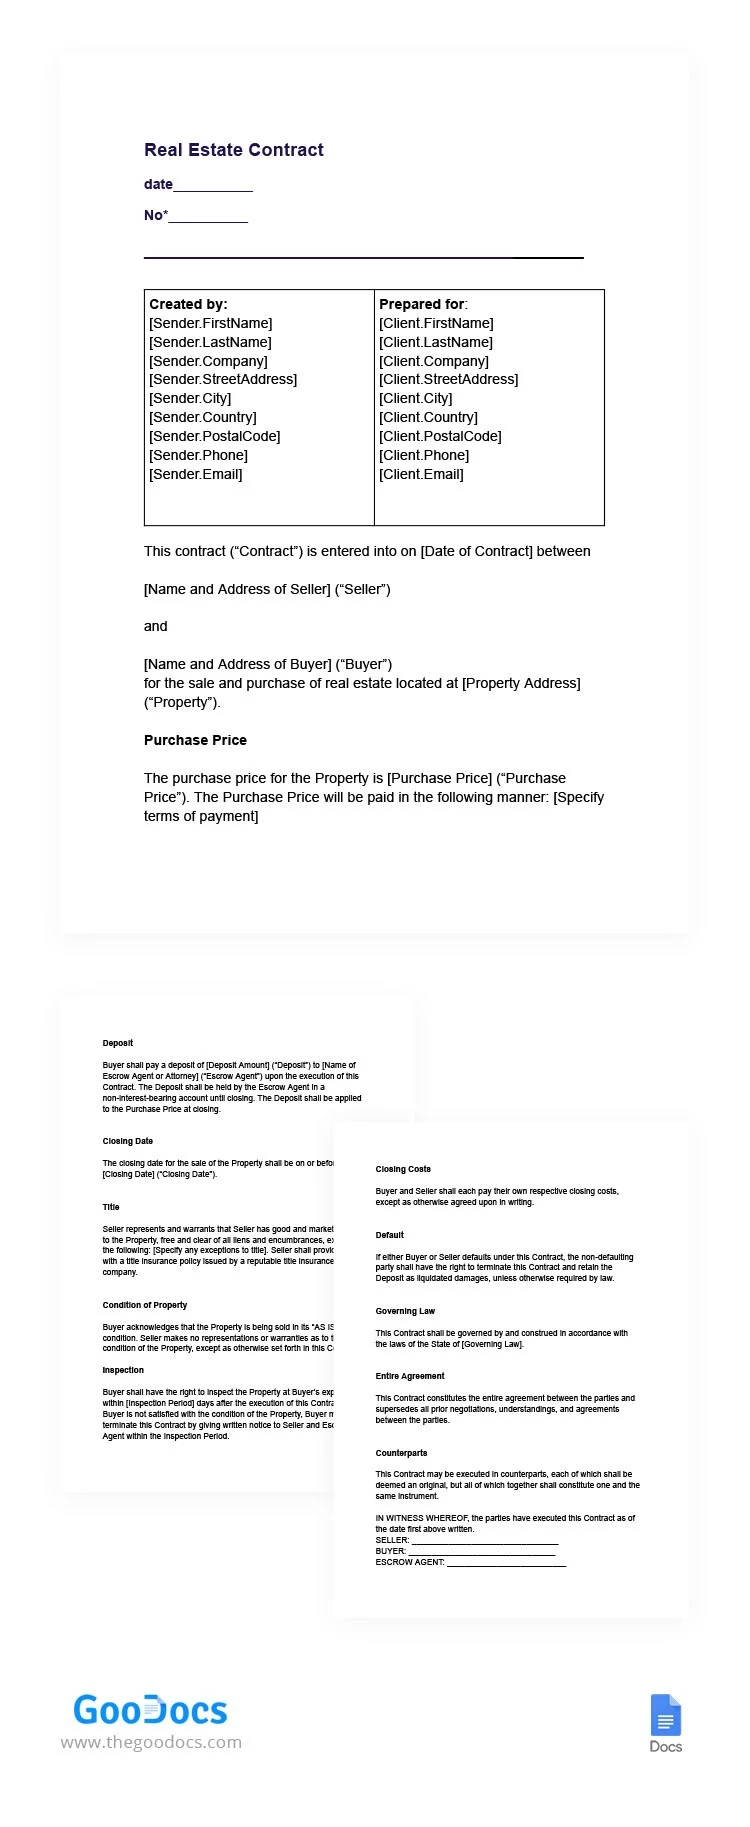 Contrat immobilier - free Google Docs Template - 10065737